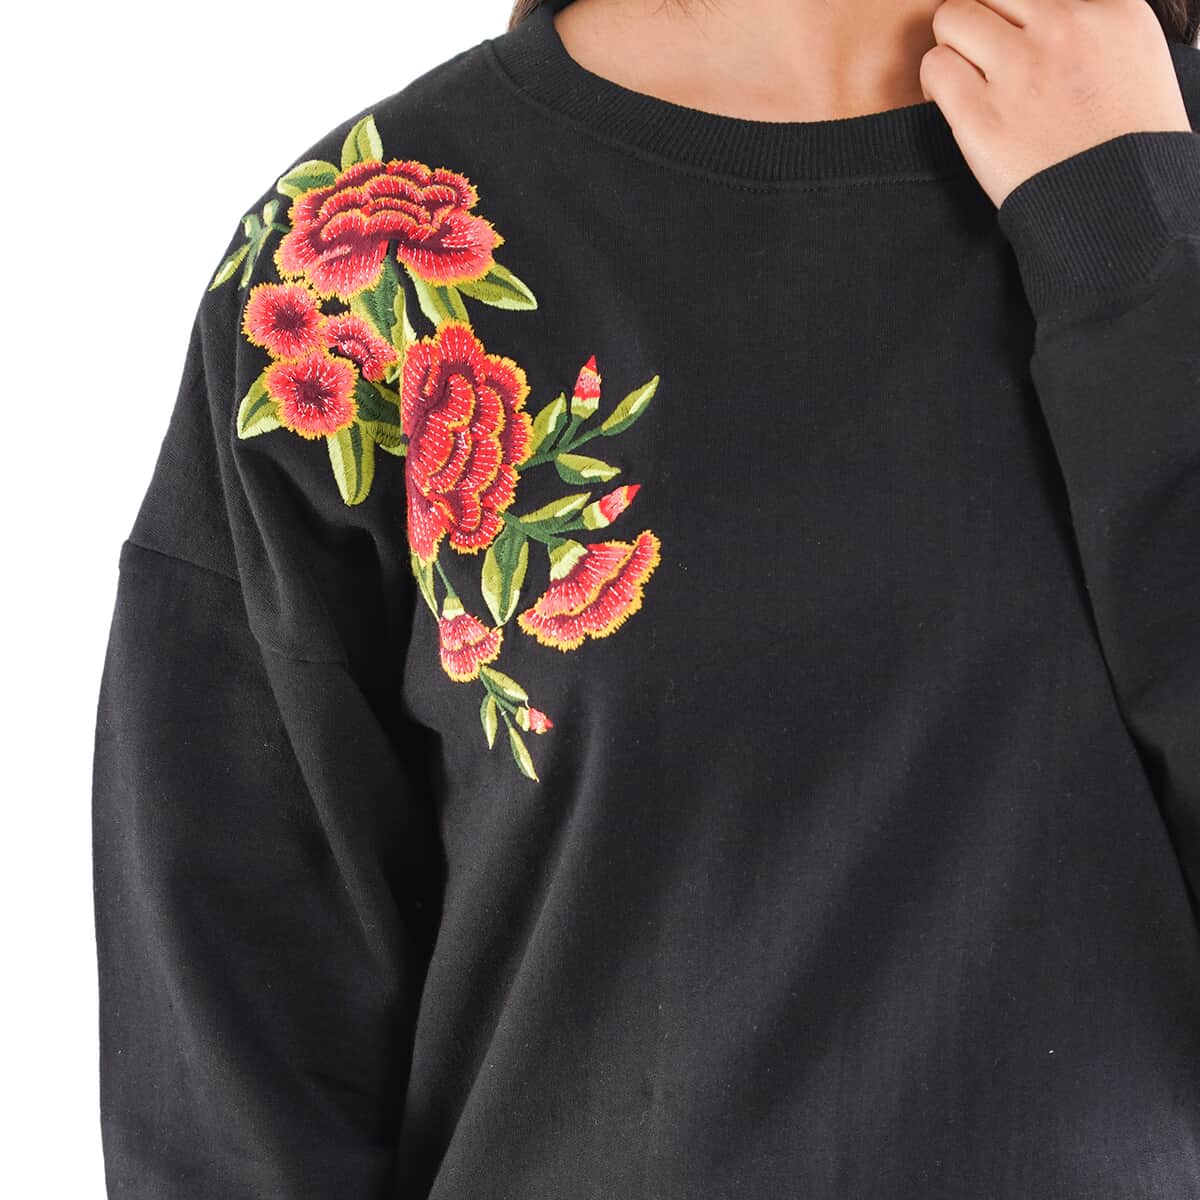 TAMSY 100% Cotton Fleece Knit Sweatshirt with Applique image number 4